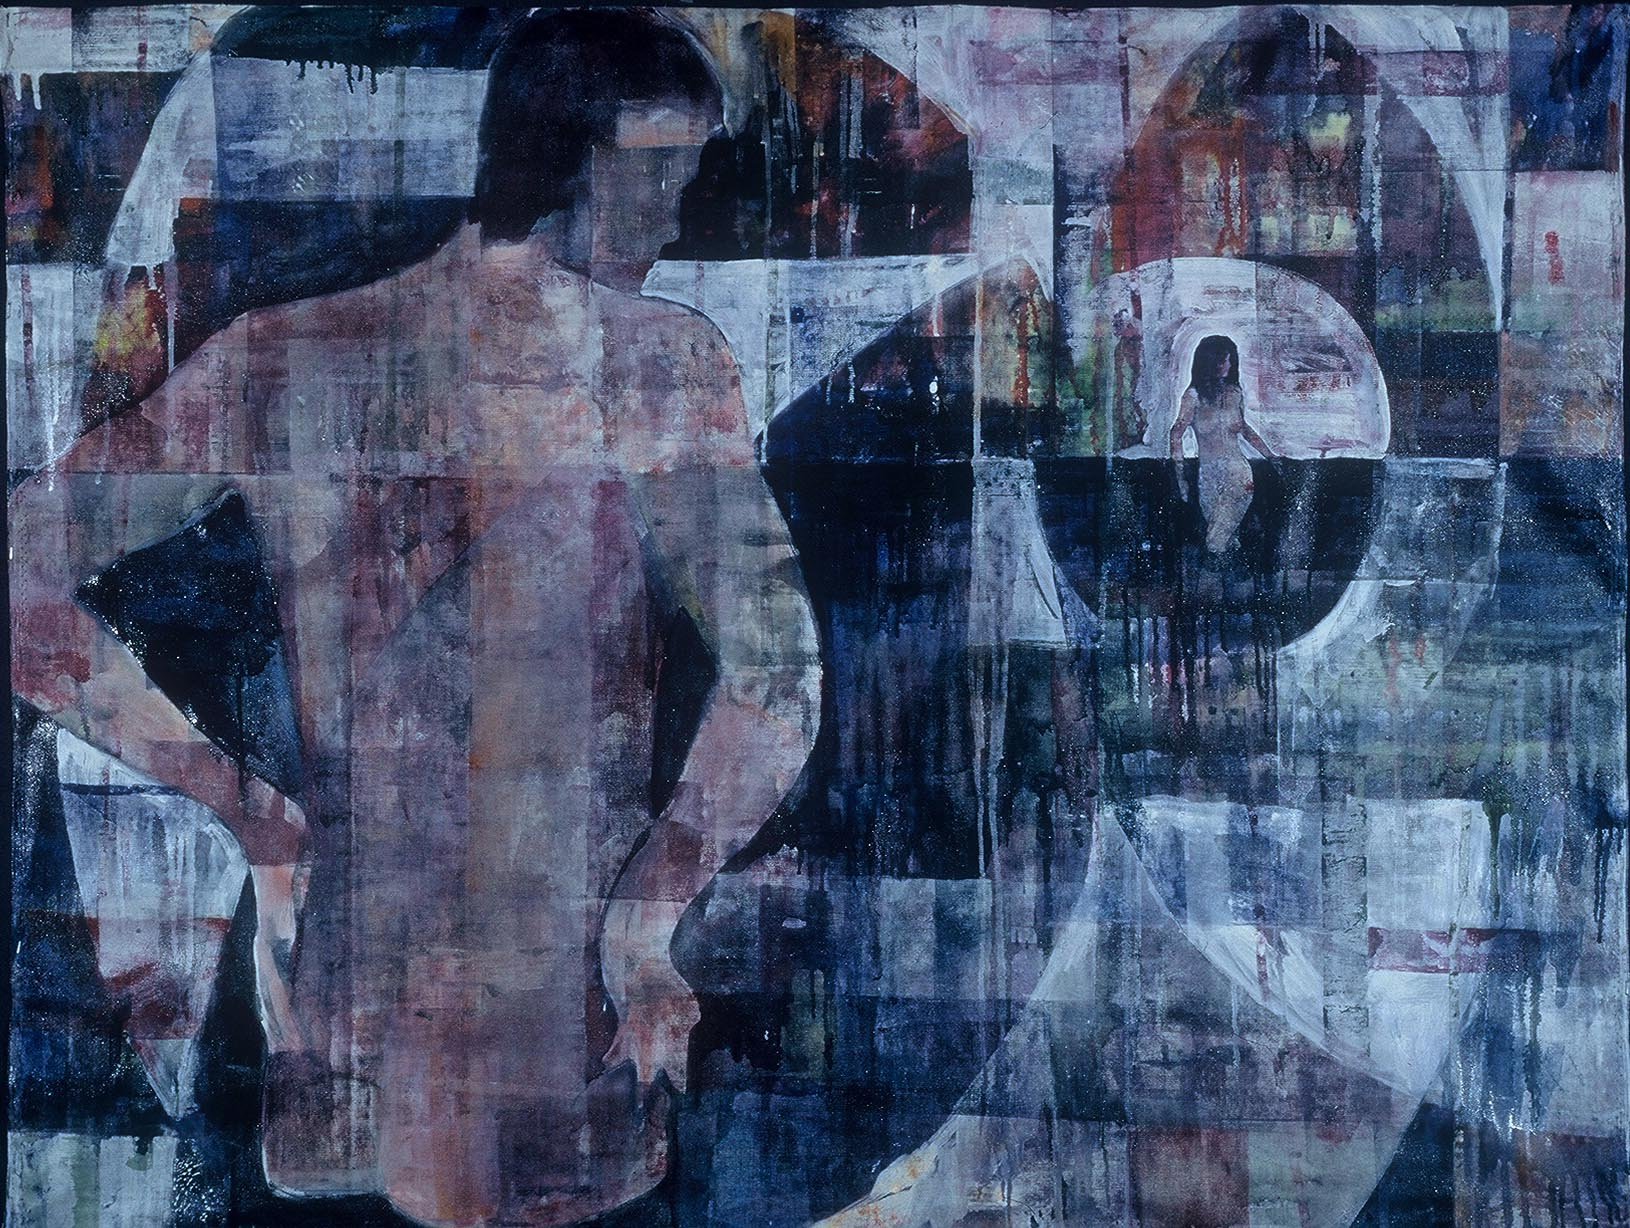 Between V, 1993, oil on canvas